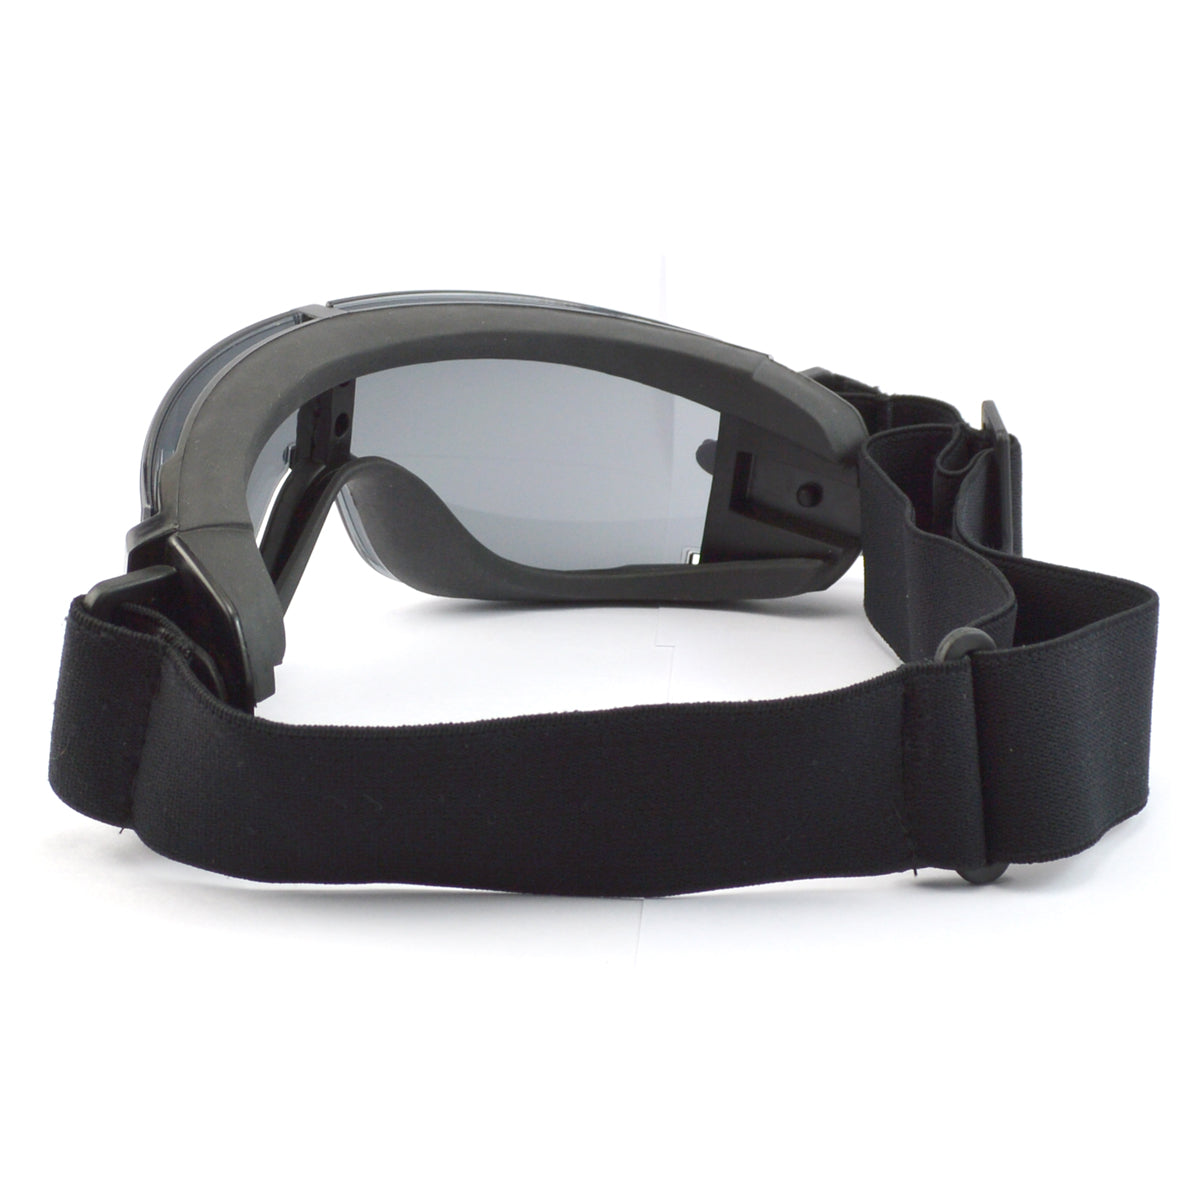 Semi-goggle style cycling sunglasses with interchangeable color lenses